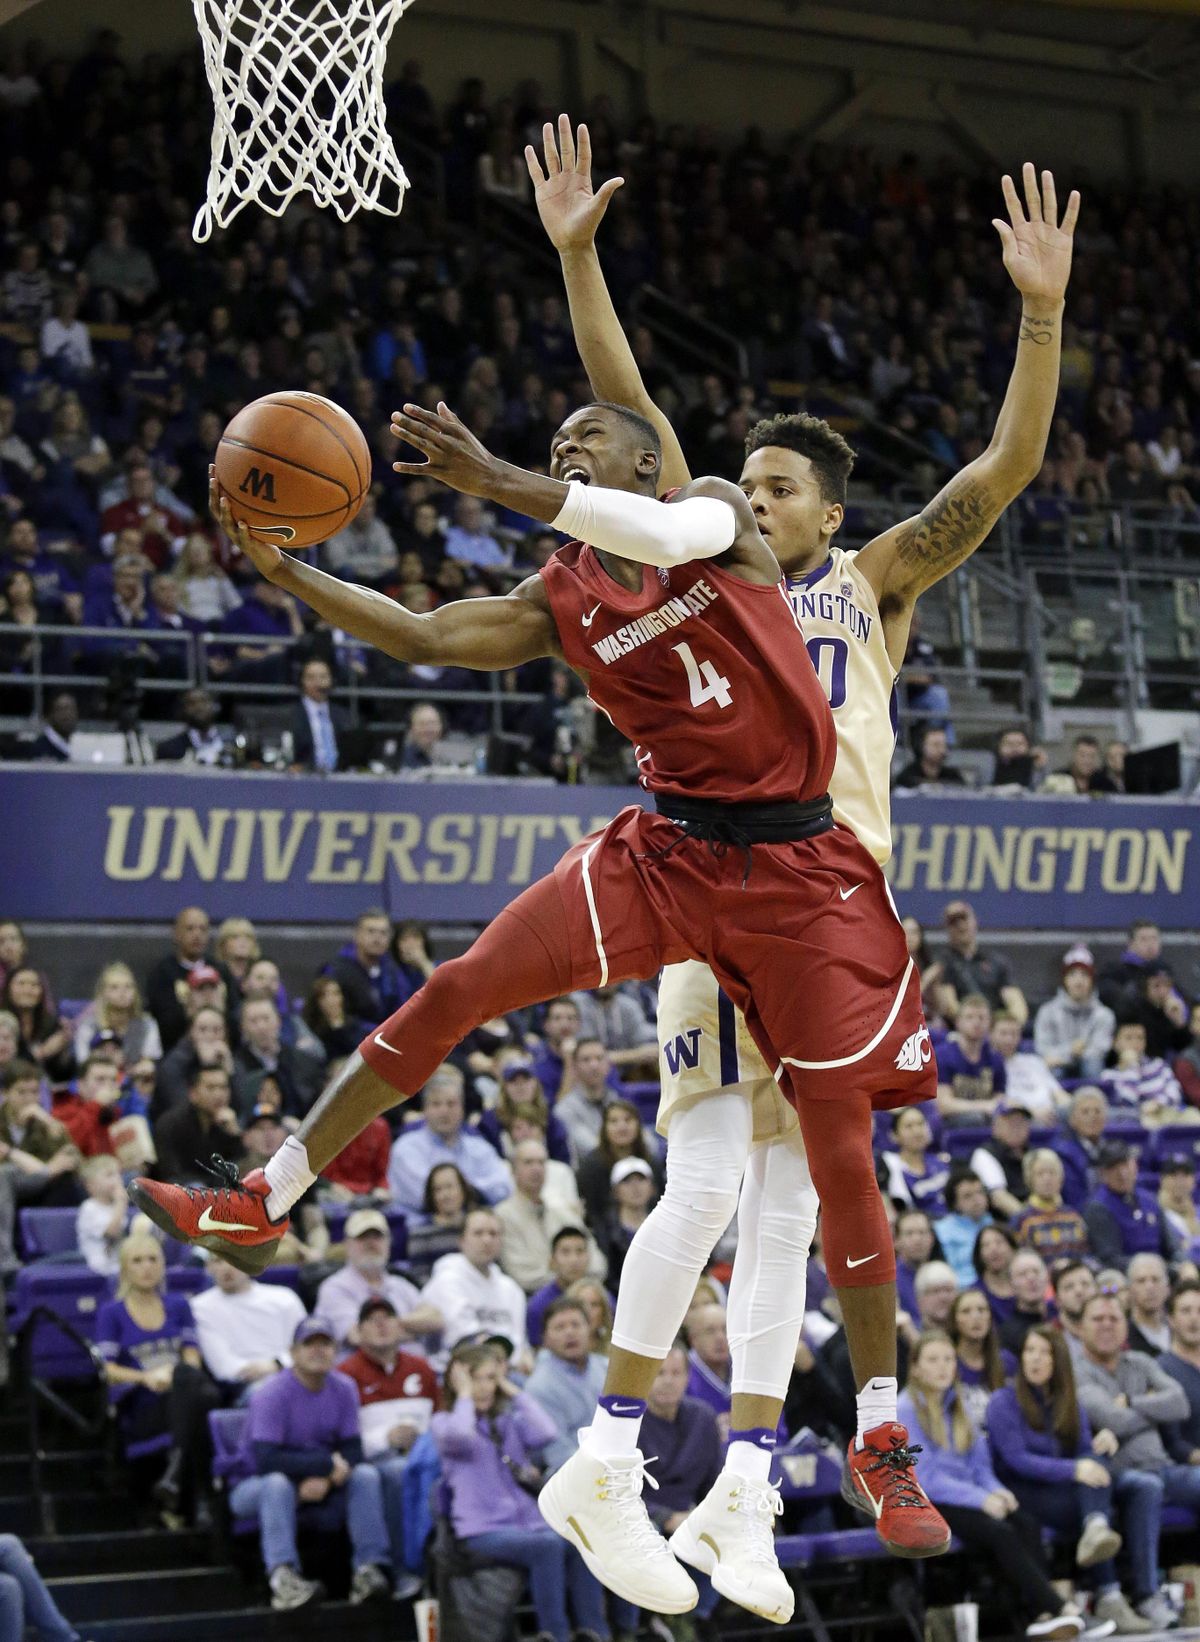 Washington State’s Viont’e Daniels drives to score in front of Washington